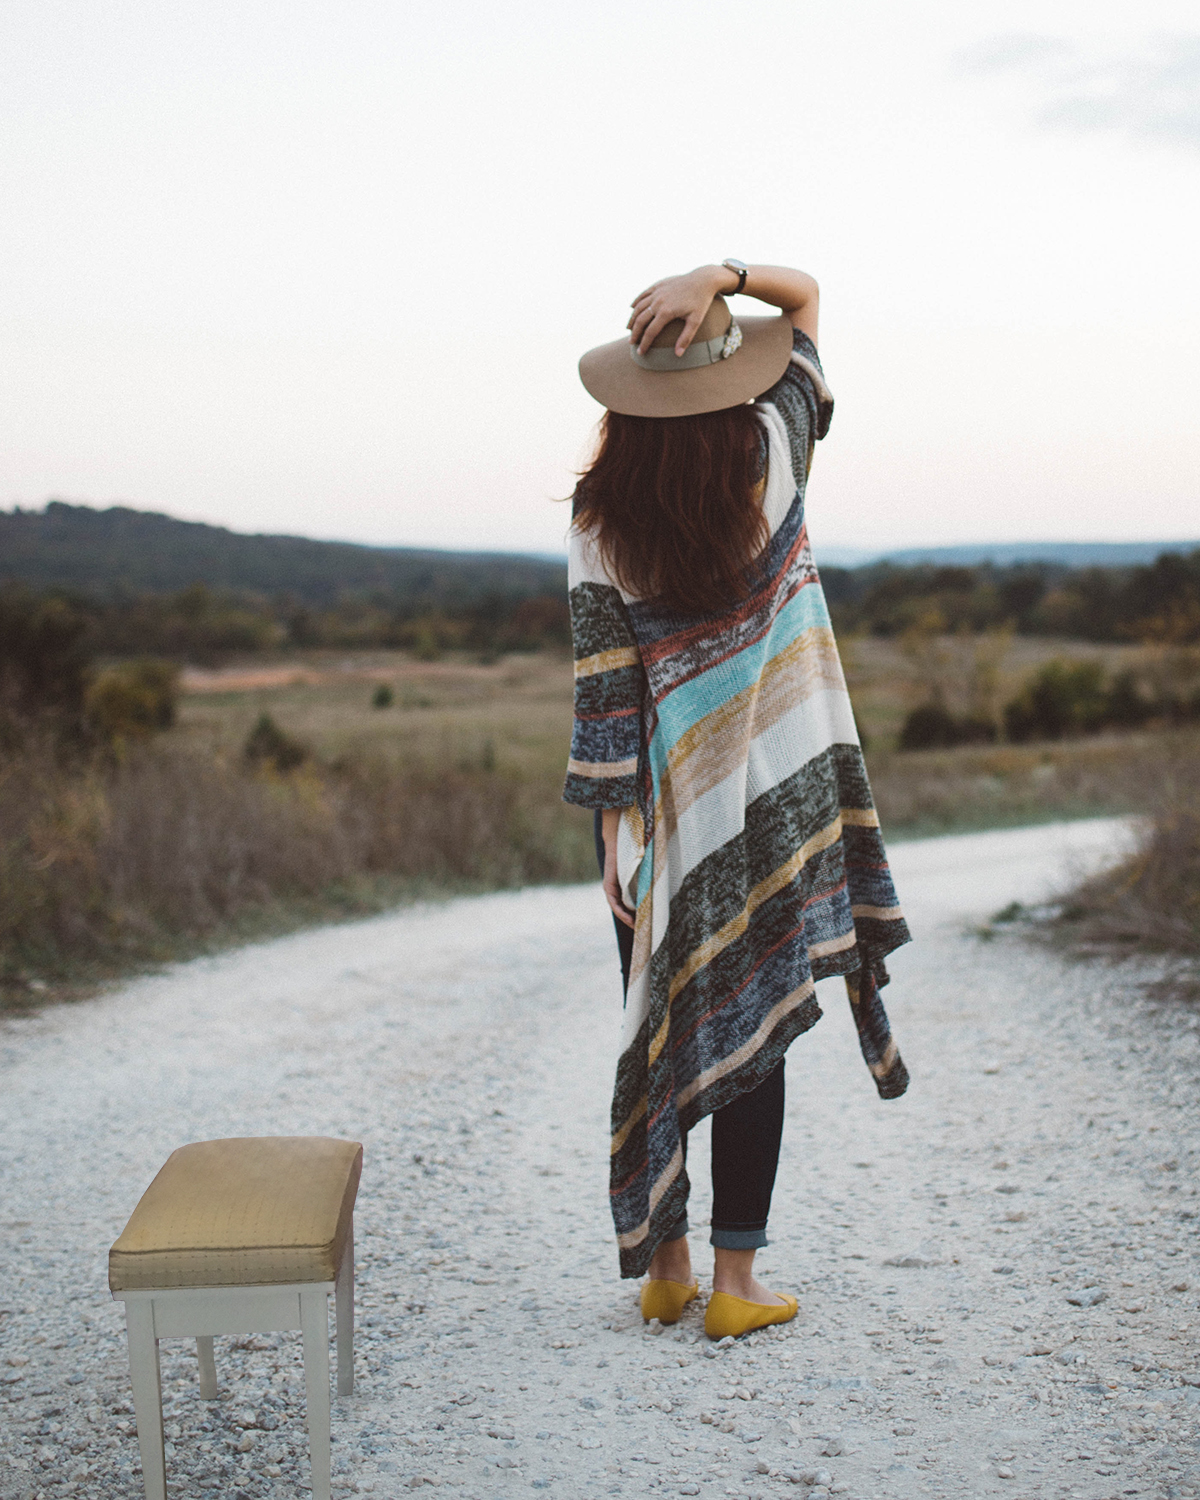 A person with long cardigan and long hair stands staring down a gravel road in the desert, with one hand on their hat on their head. Next to them is a piano bench, also in the middle of the road.